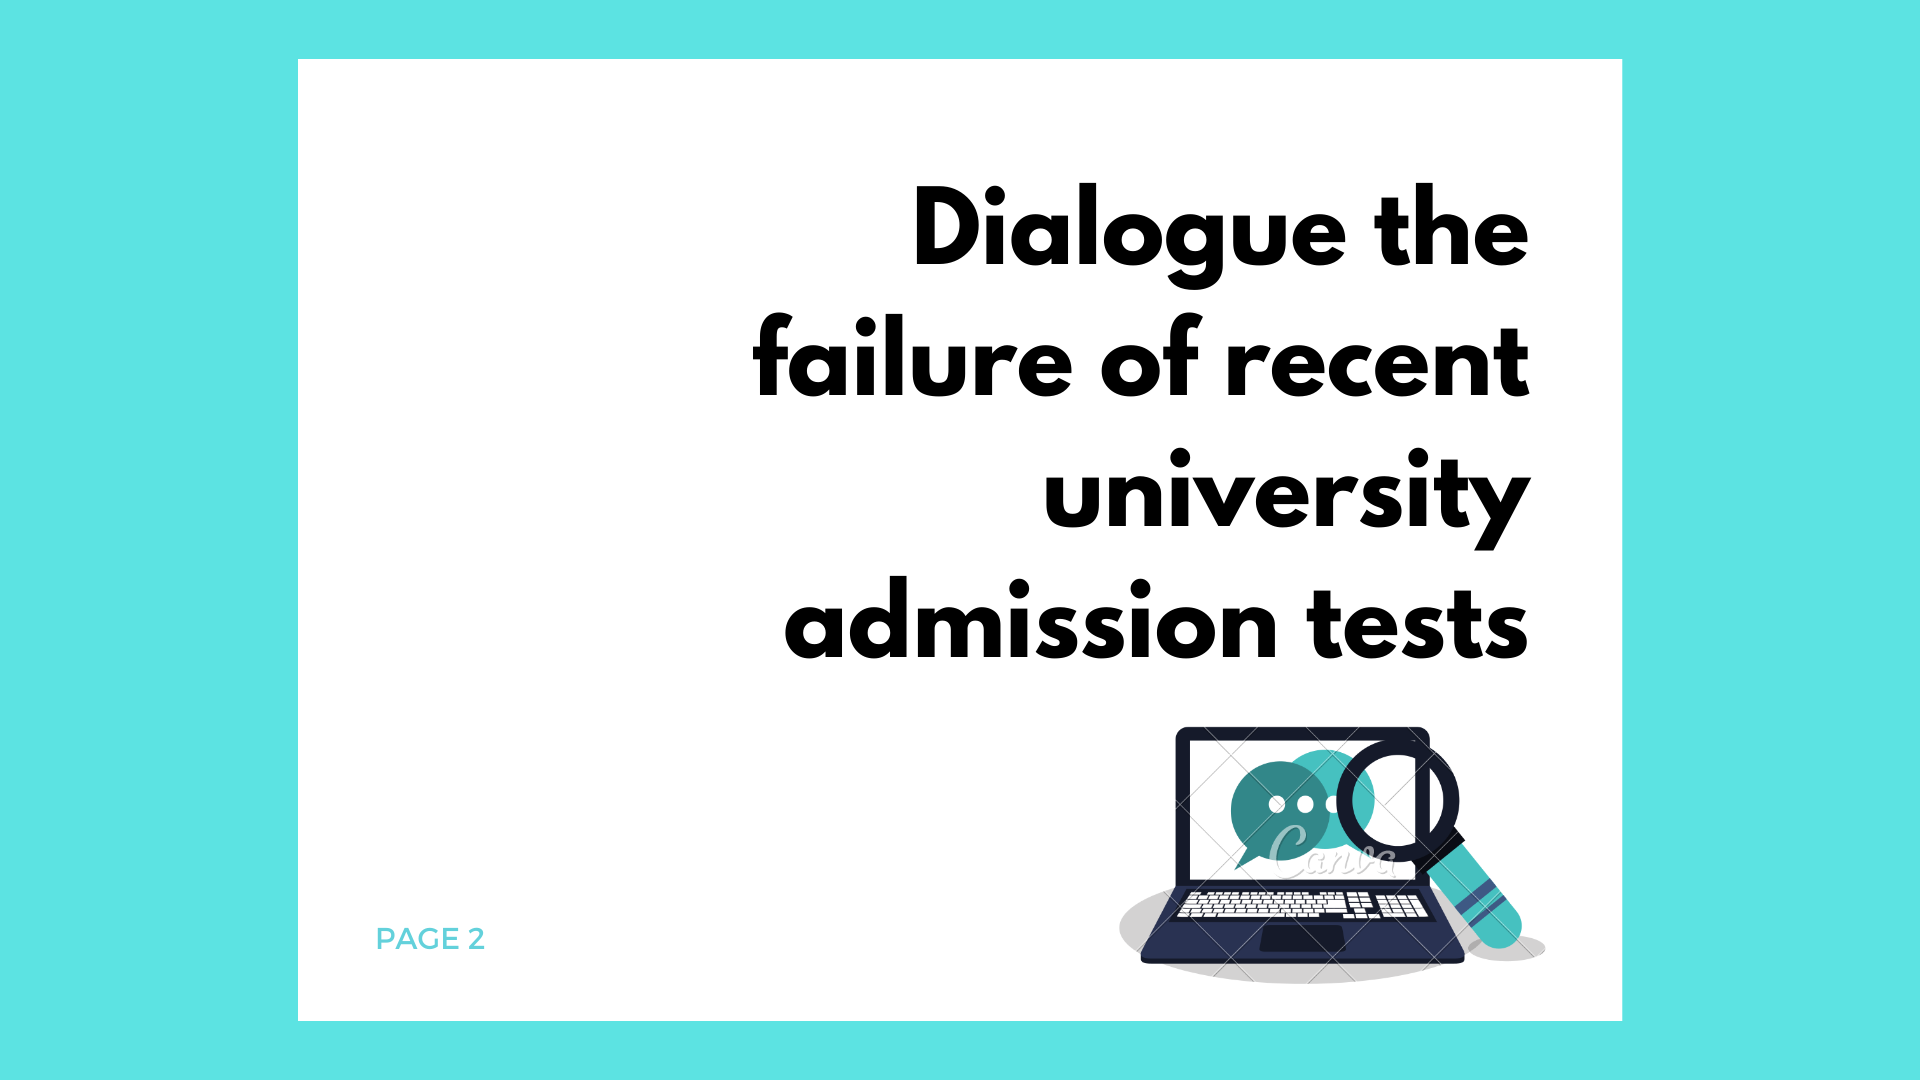 Dialogue the failure of recent university admission tests